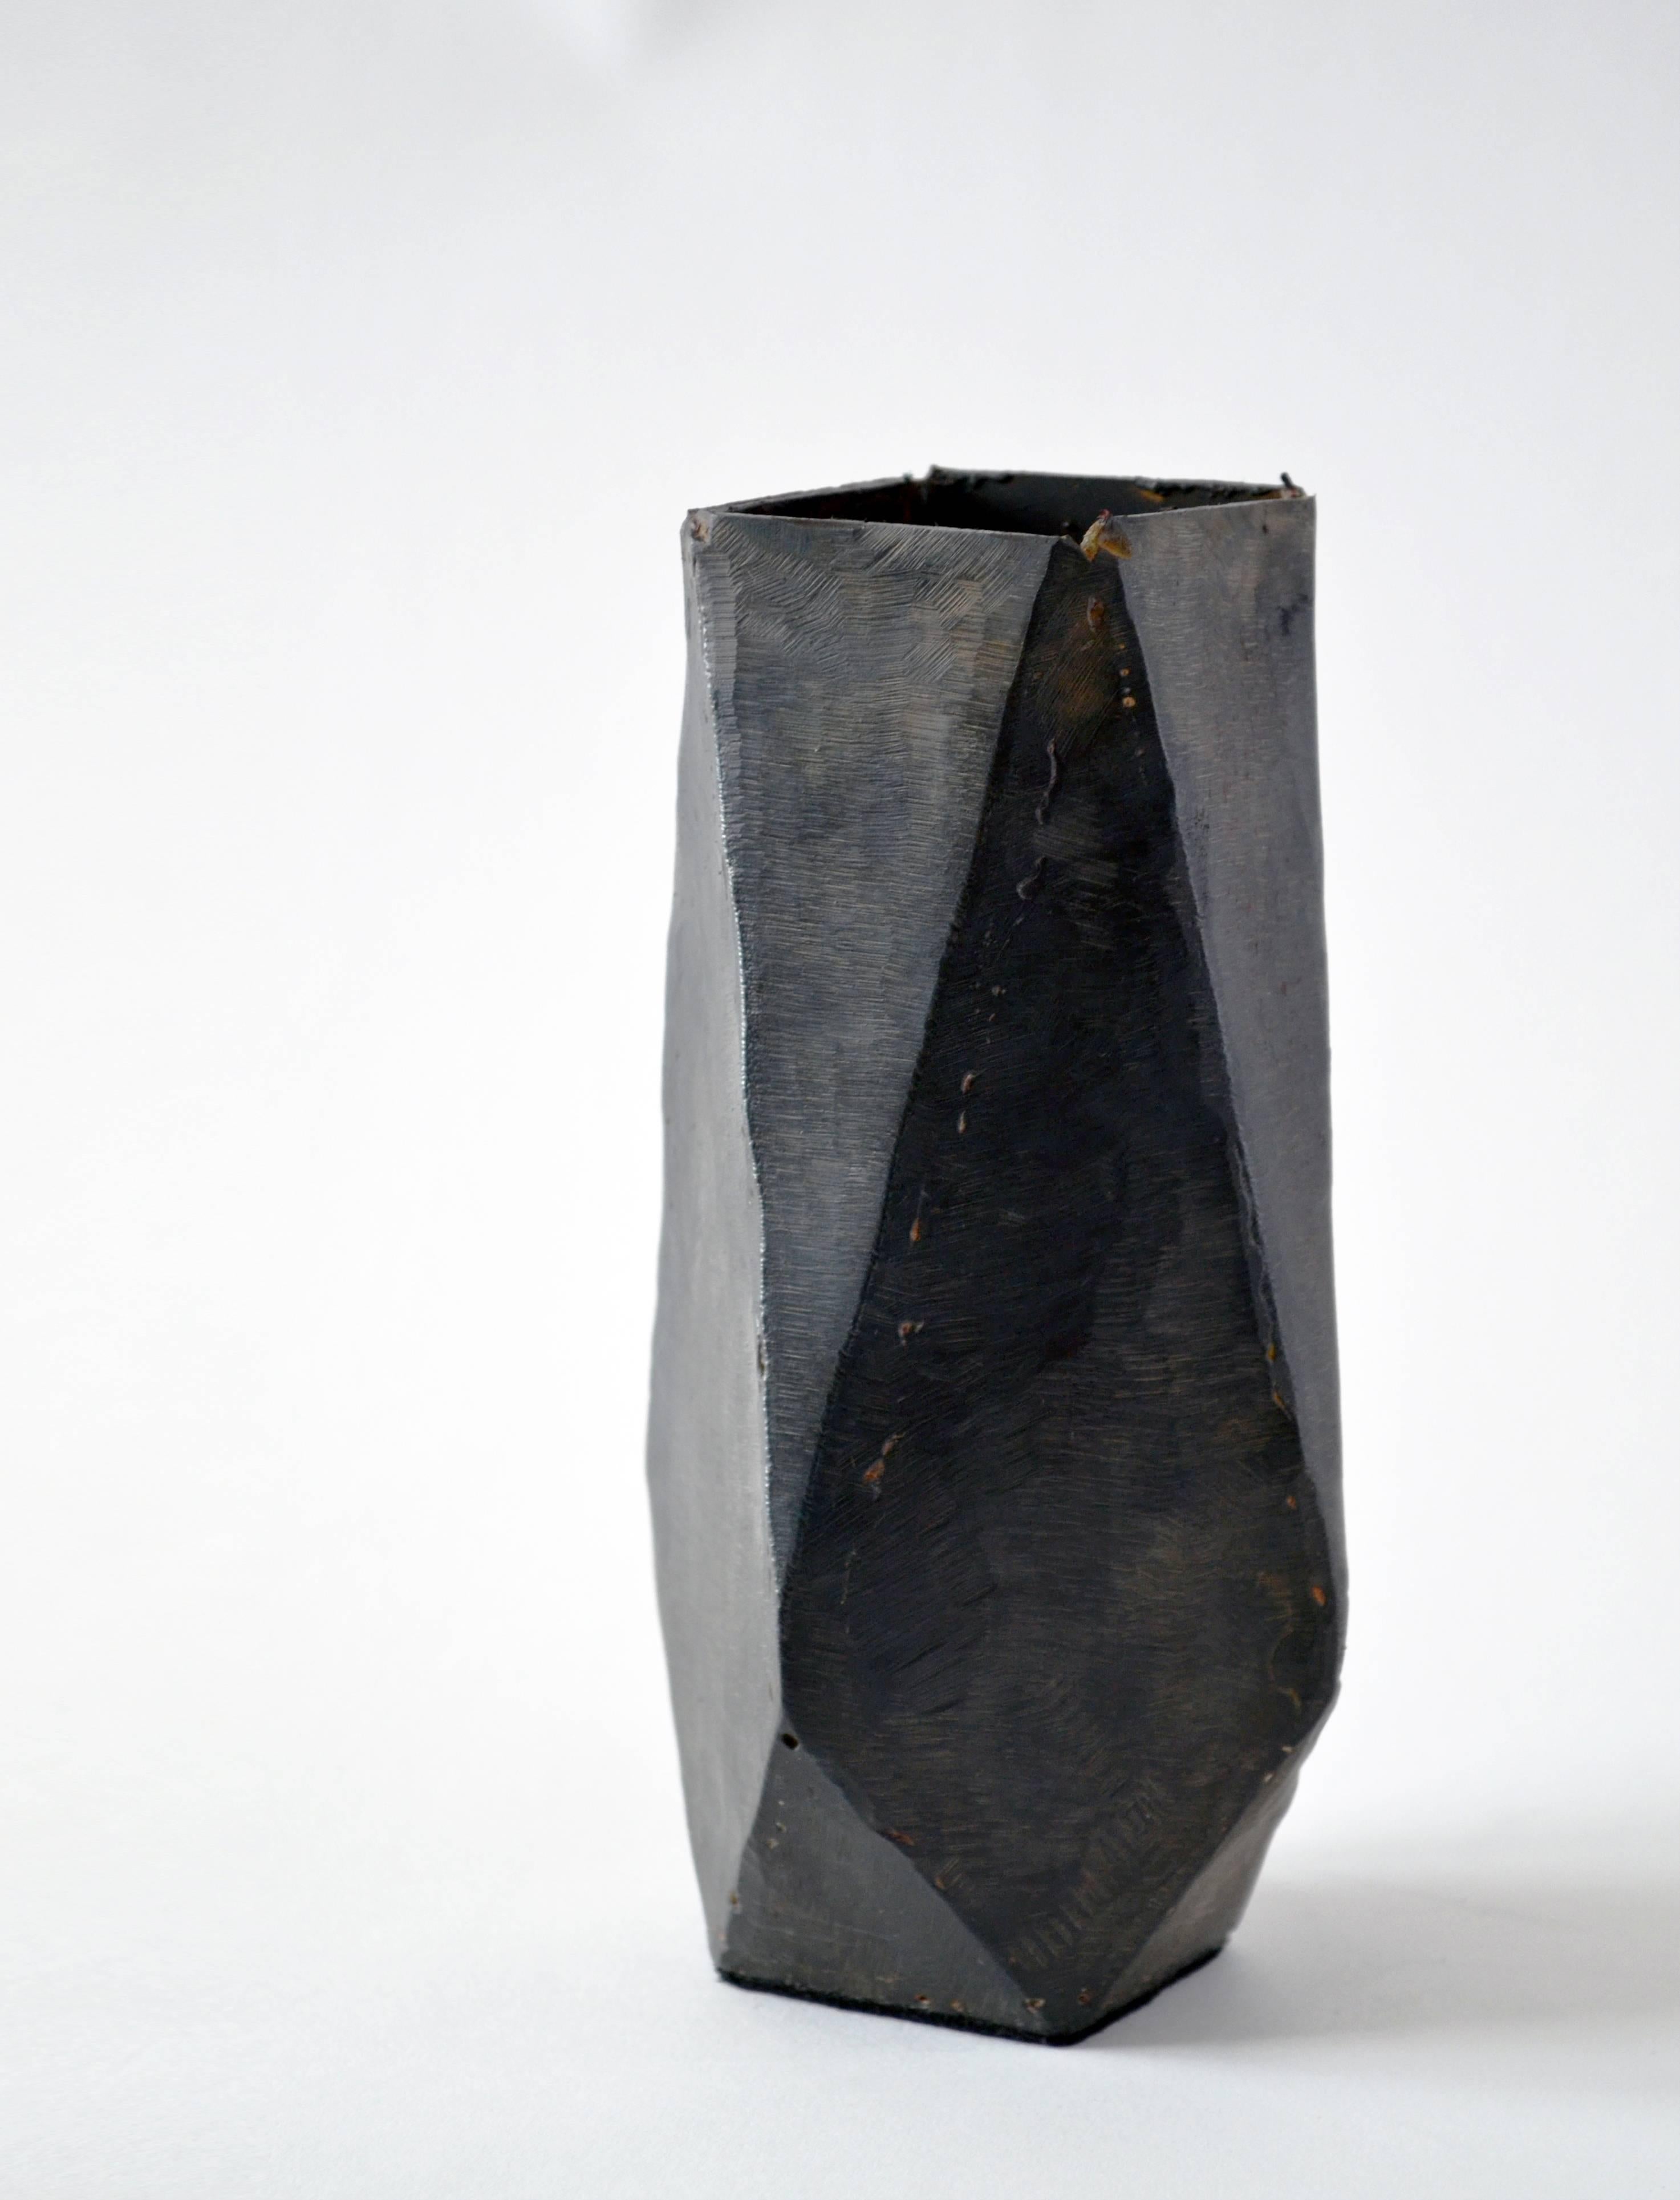 Carved Collection of Modern Geometric Vessels Handmade by J.M. Szymanski, made in NYC